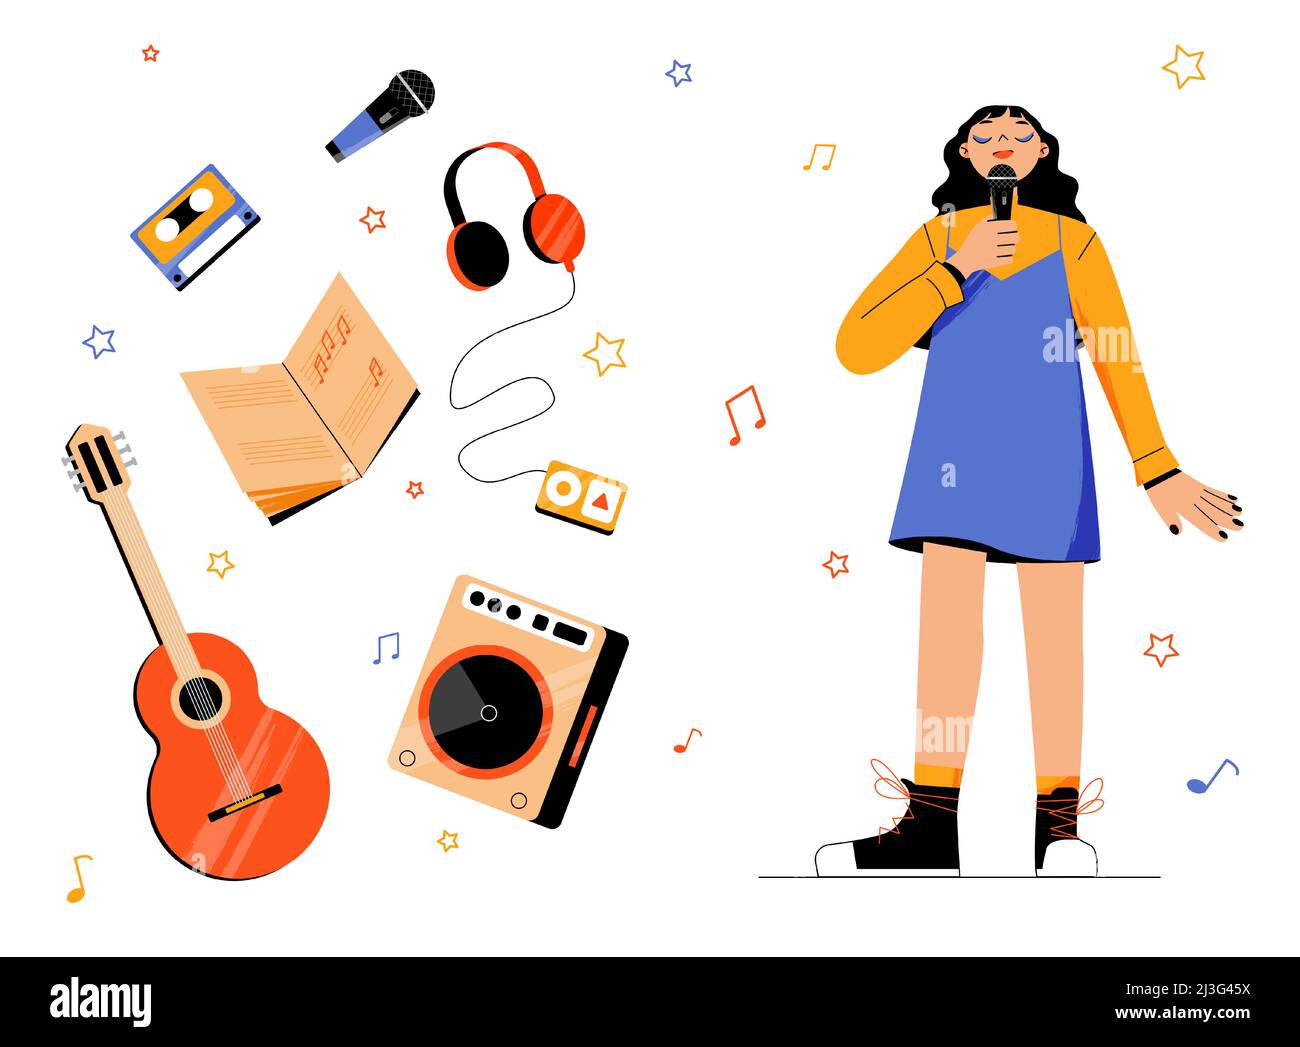 Music and singing hobby concept. Young girl sing with microphone and musical items around. Karaoke entertainment, vocalist classes learning or recreat Stock Vector